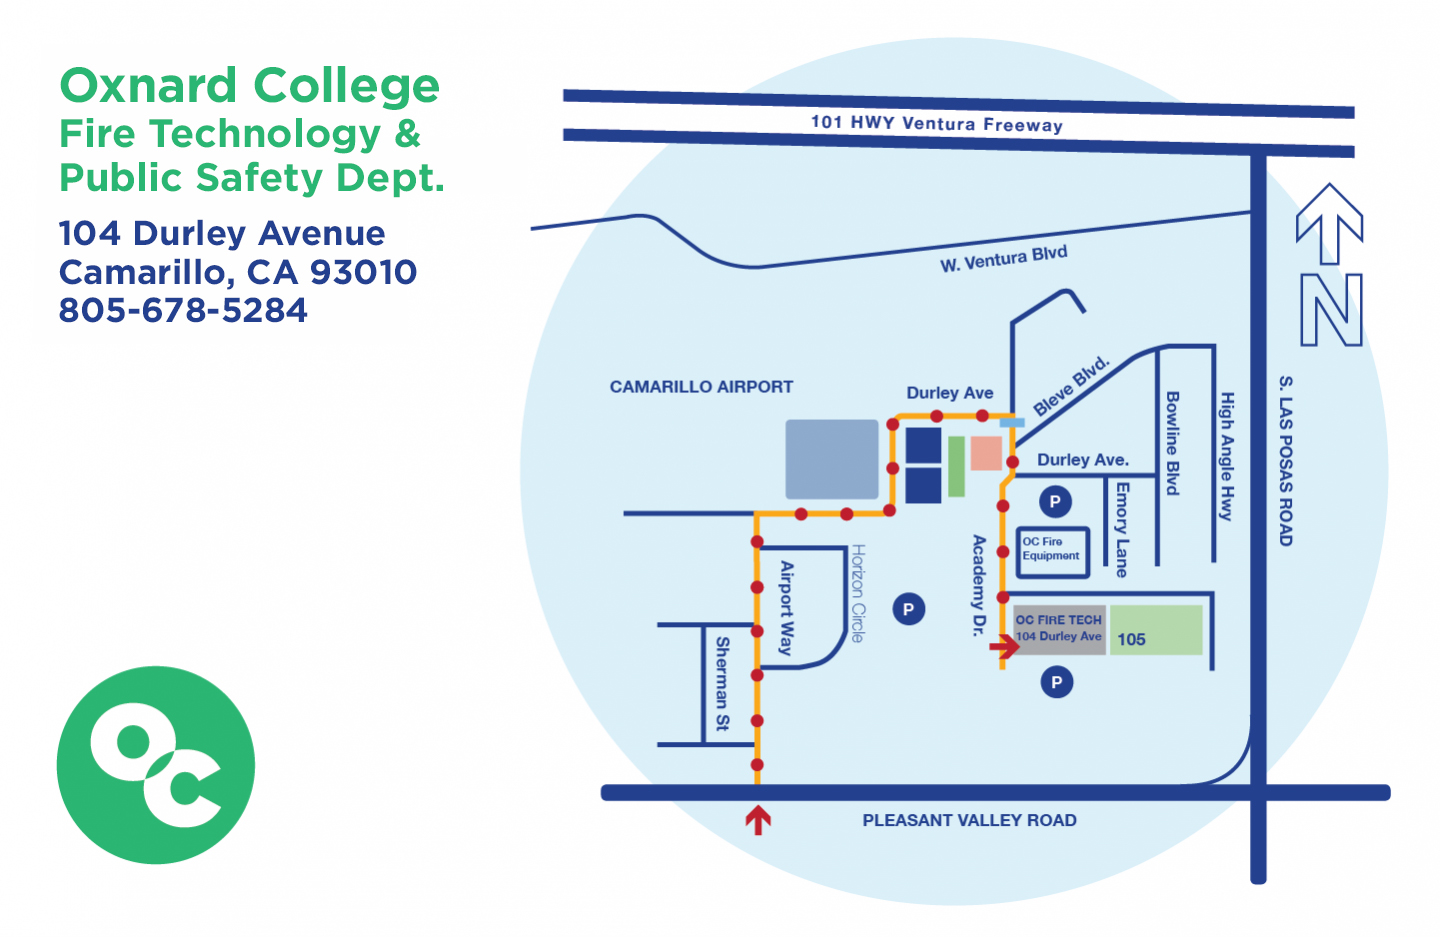 map to fire technology center in camarillo